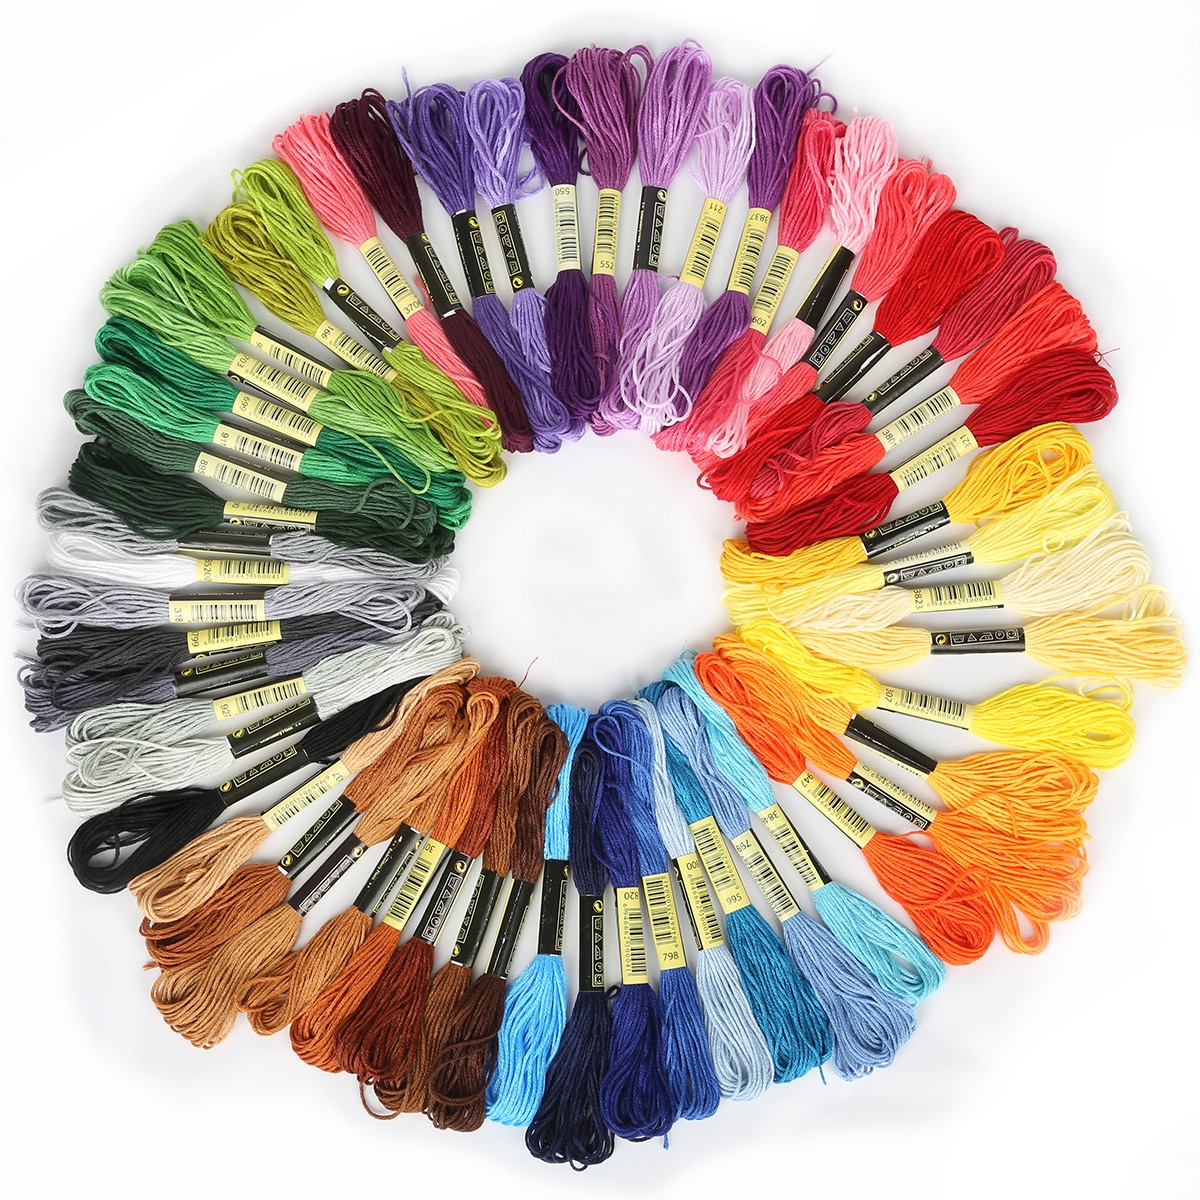 8pcs 7.5m Multiple Color Thread Cross Stitch Cotton Sewing Skeins Craft Embroidery Thread Floss Kit DIY Sewing Tools Accessories